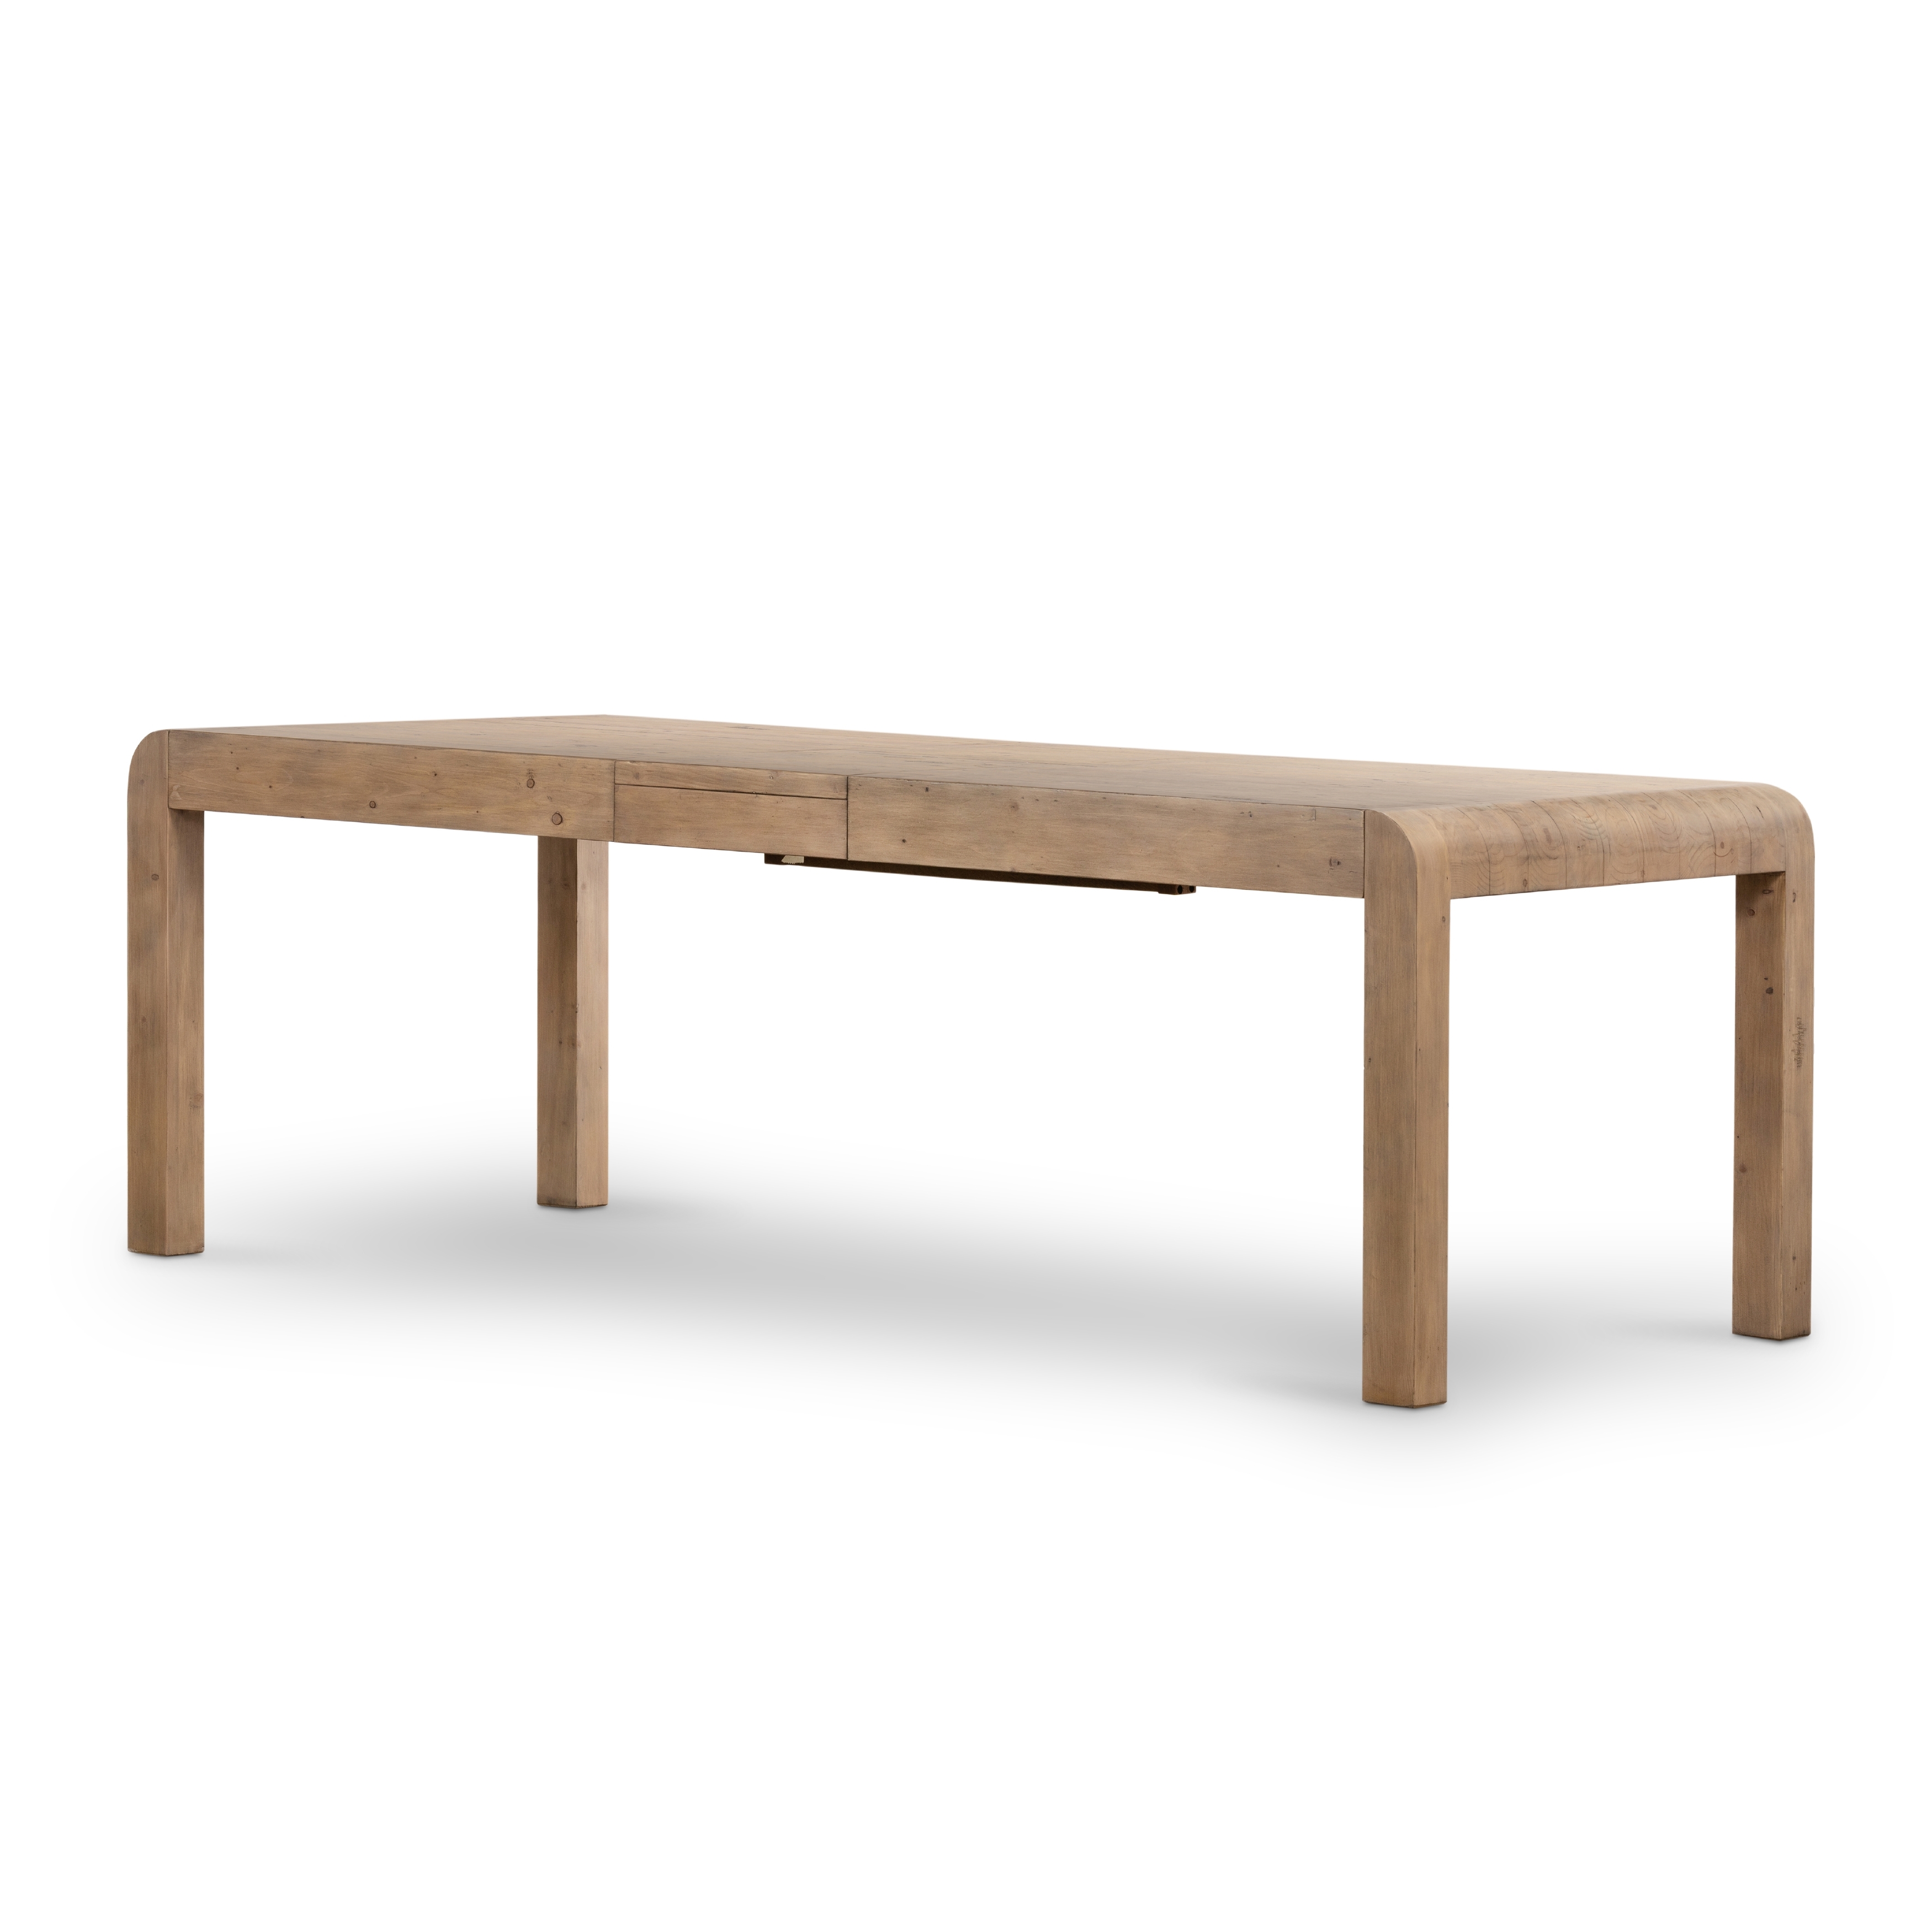 Everson 71" Extension Dining Table-Teak - Image 0